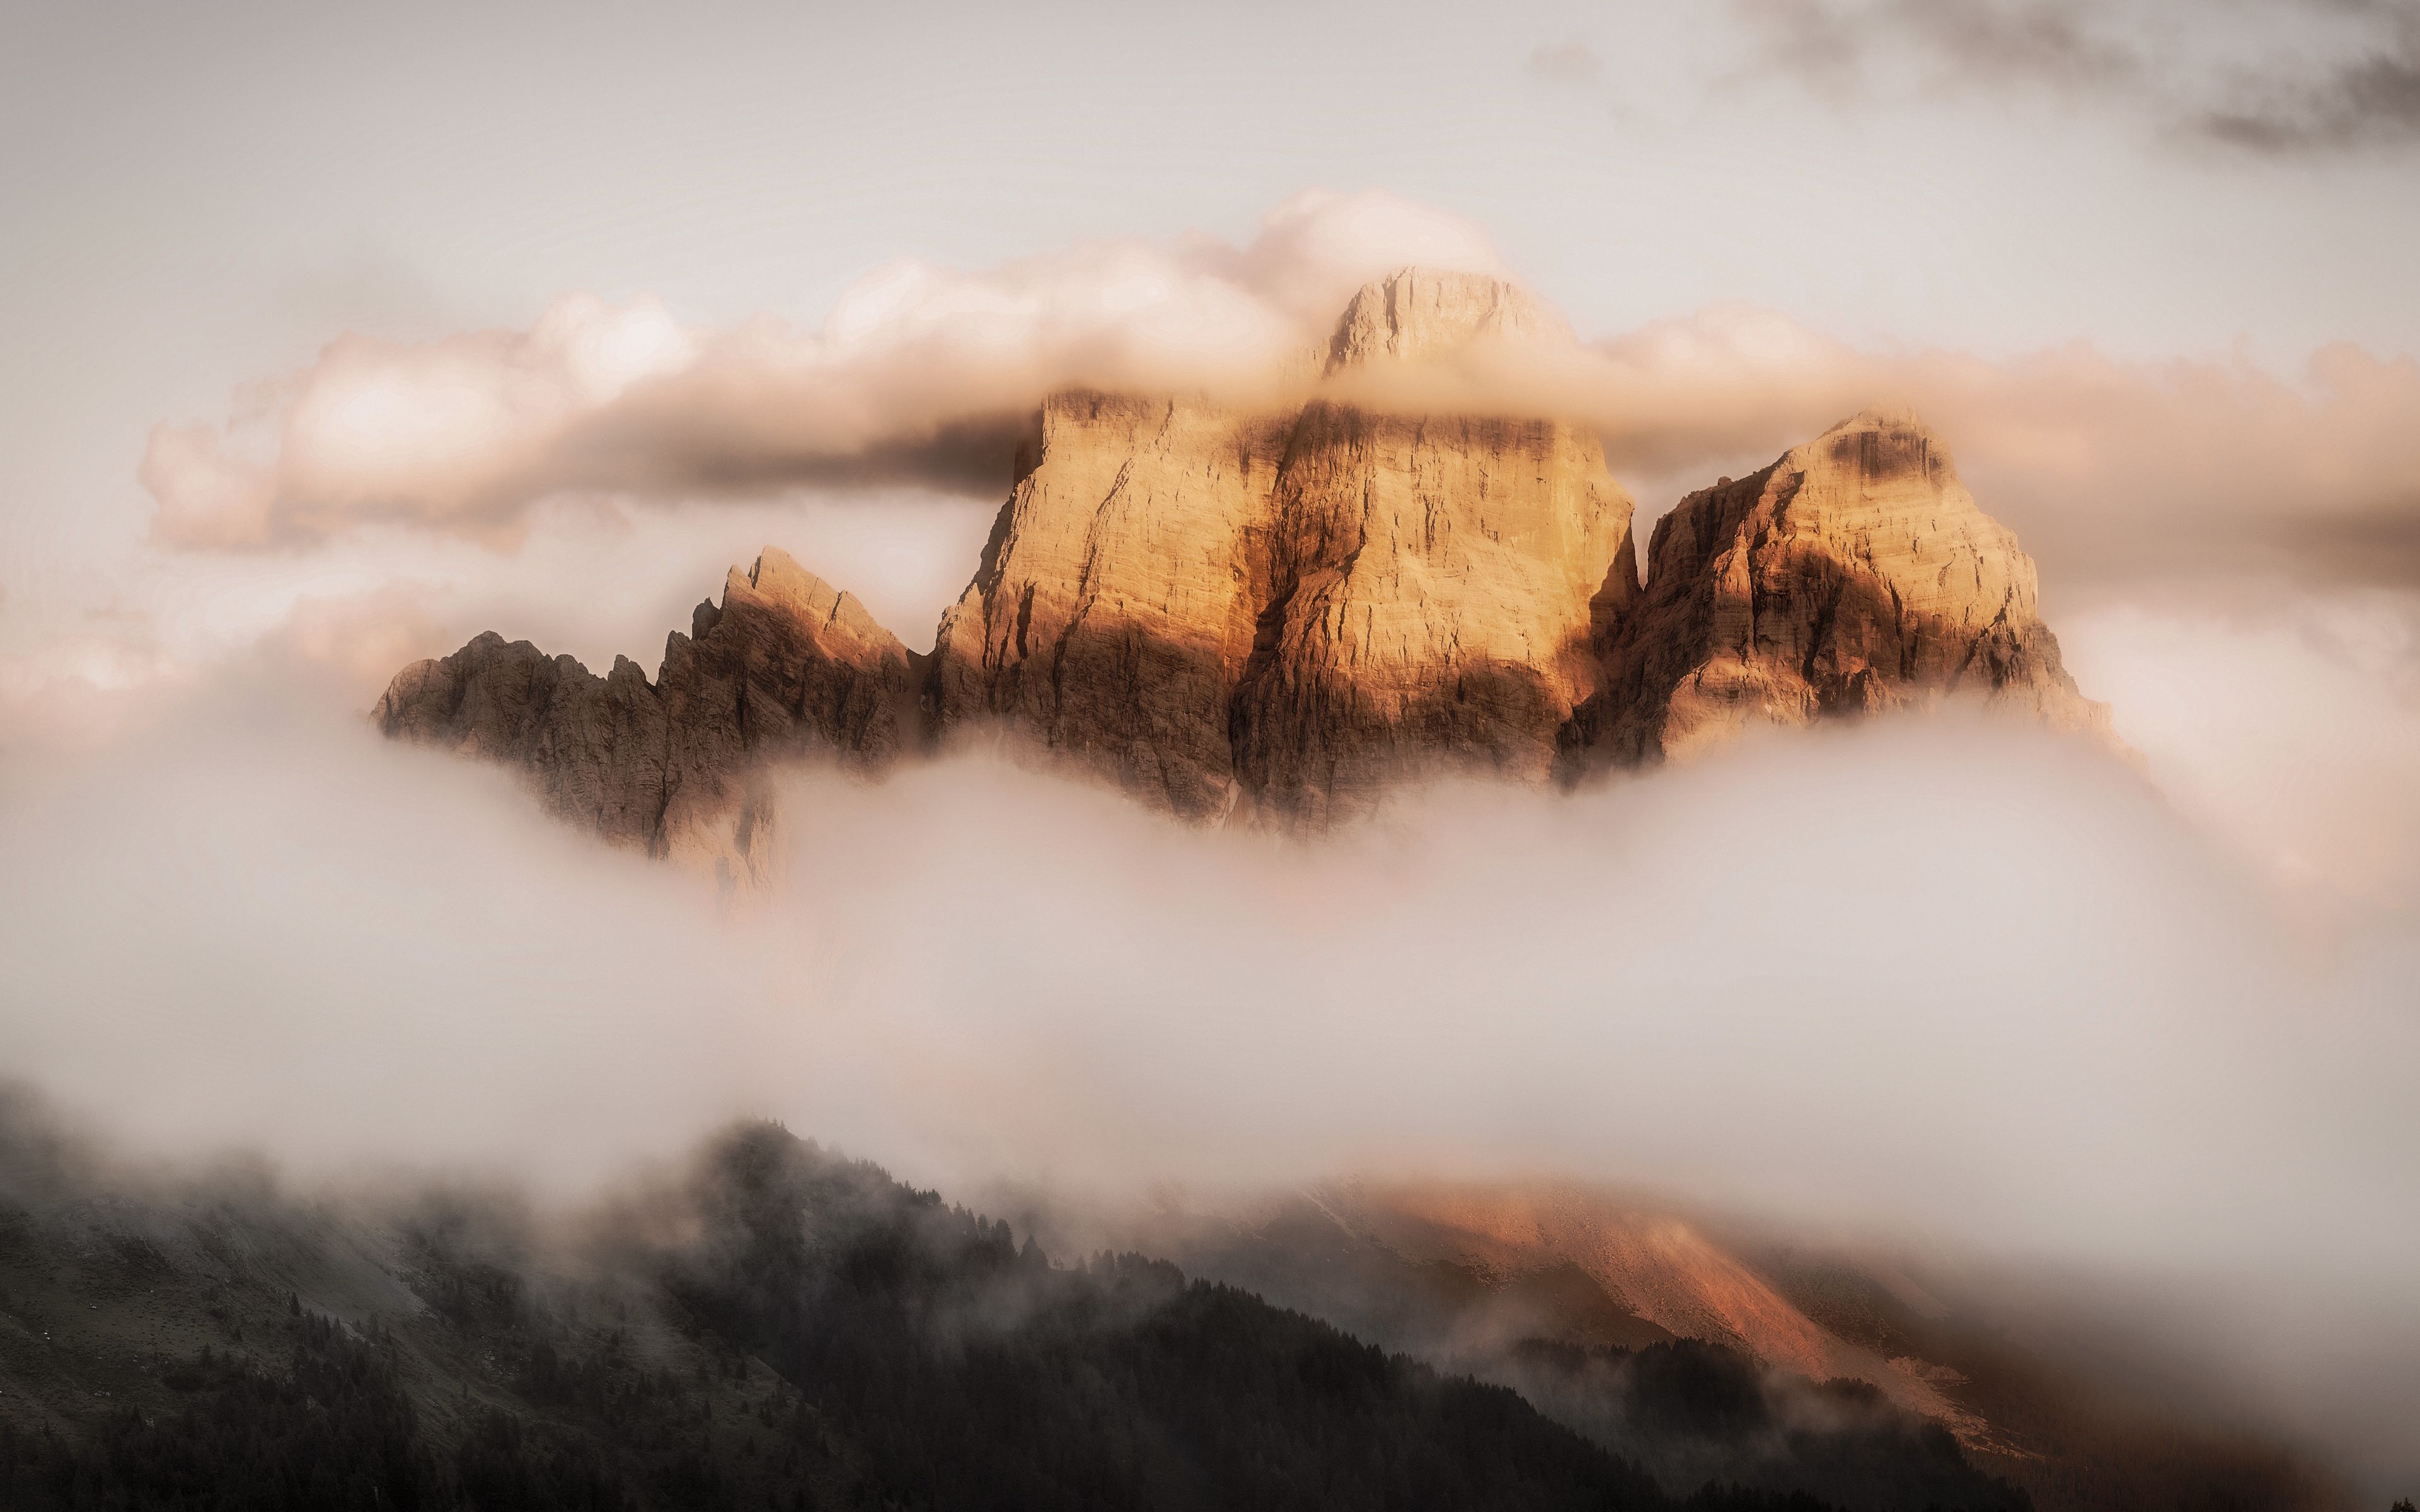 Download wallpaper 3840x2400 mountains, fog, clouds, monte pelmo, dolomites, italy 4k ultra HD 16:10 HD background